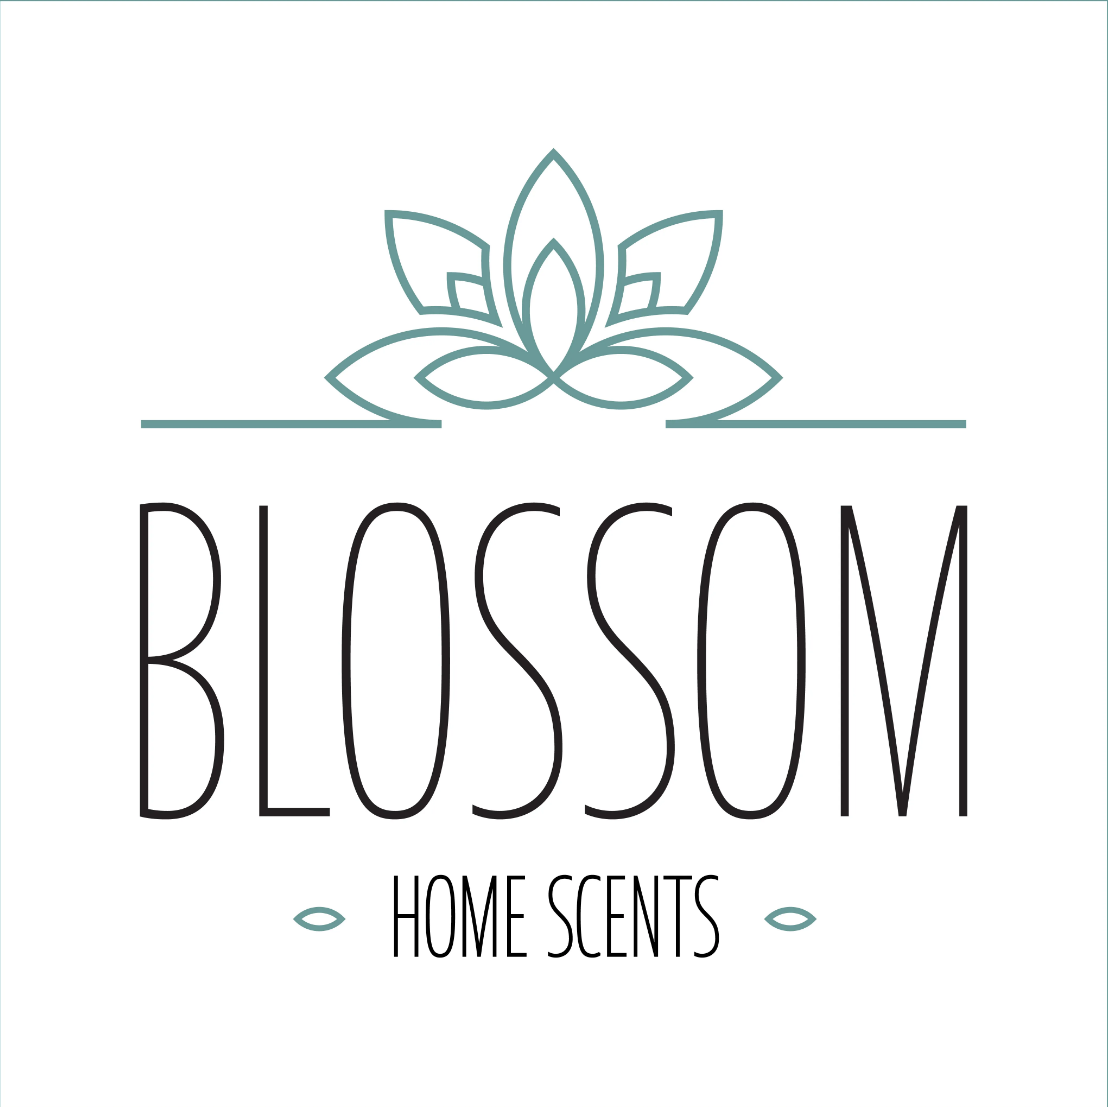 Blossom Home Scents